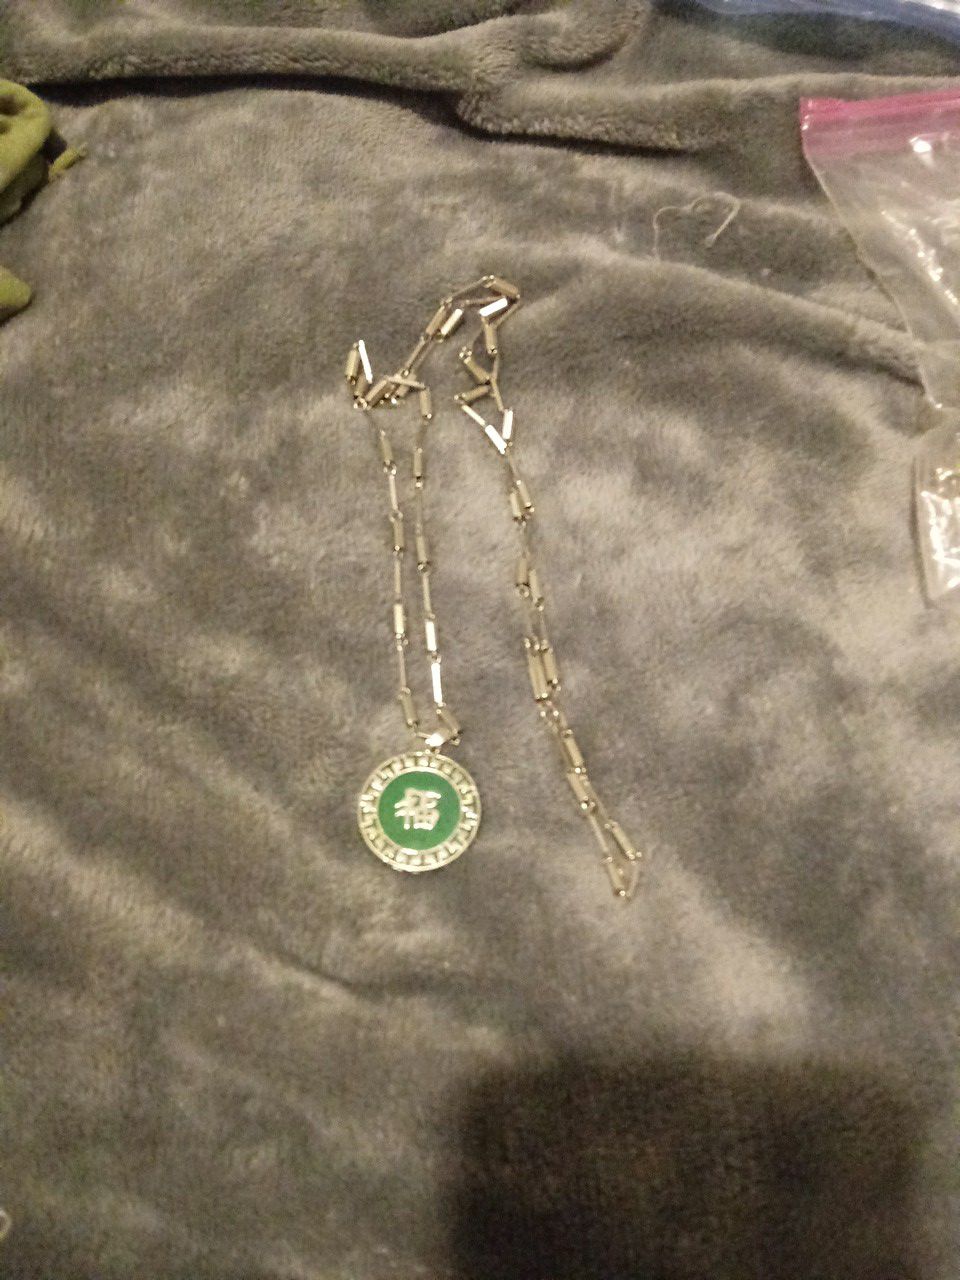 Long necklace with medallion